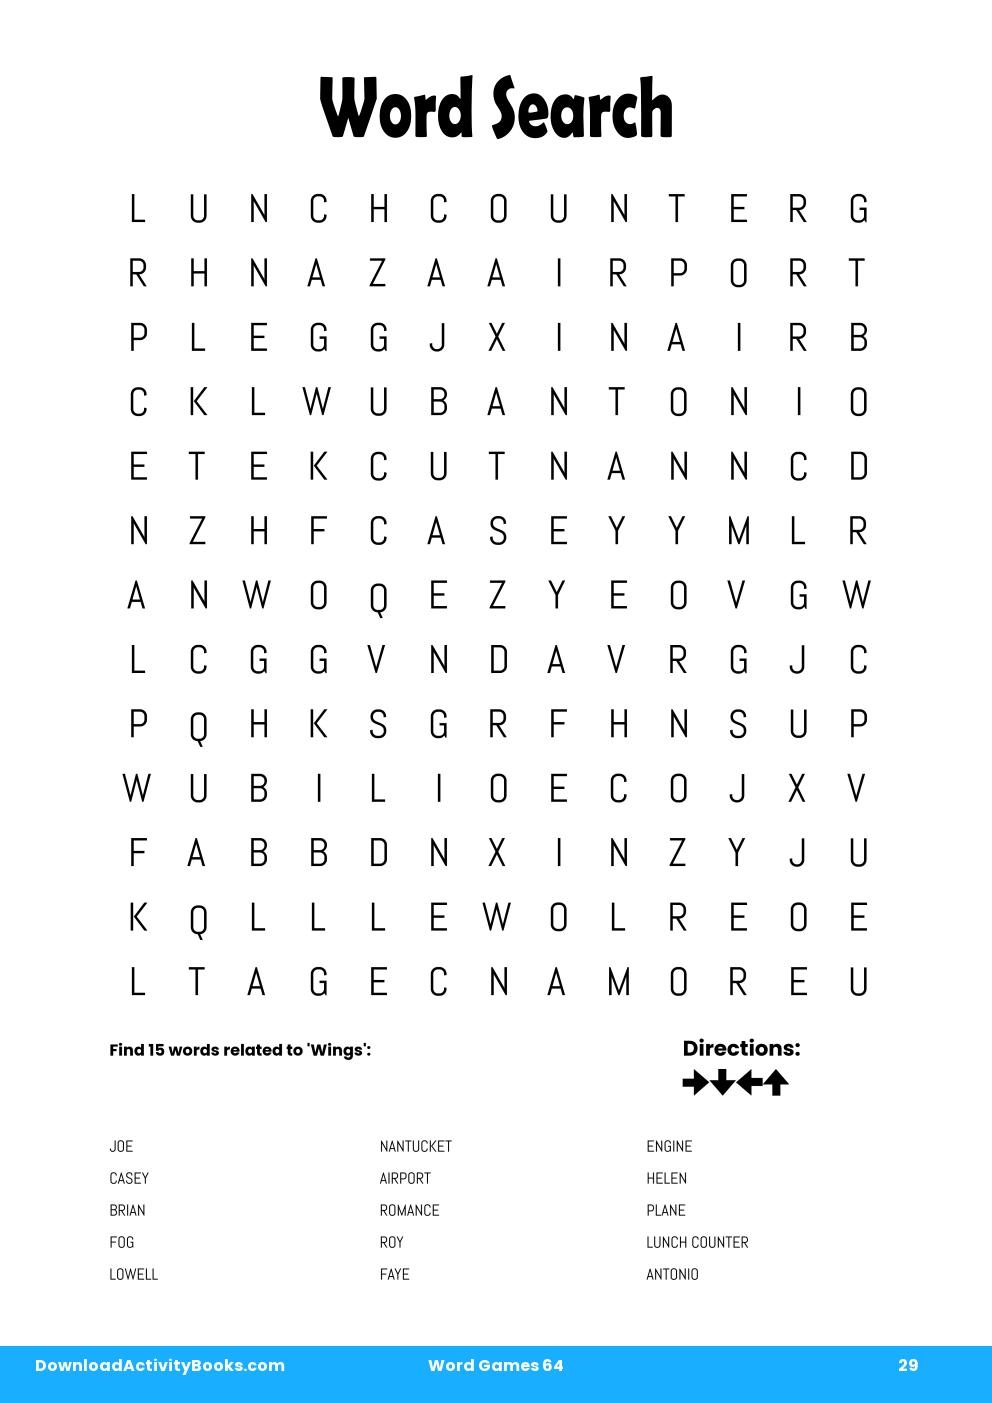 Word Search in Word Games 64